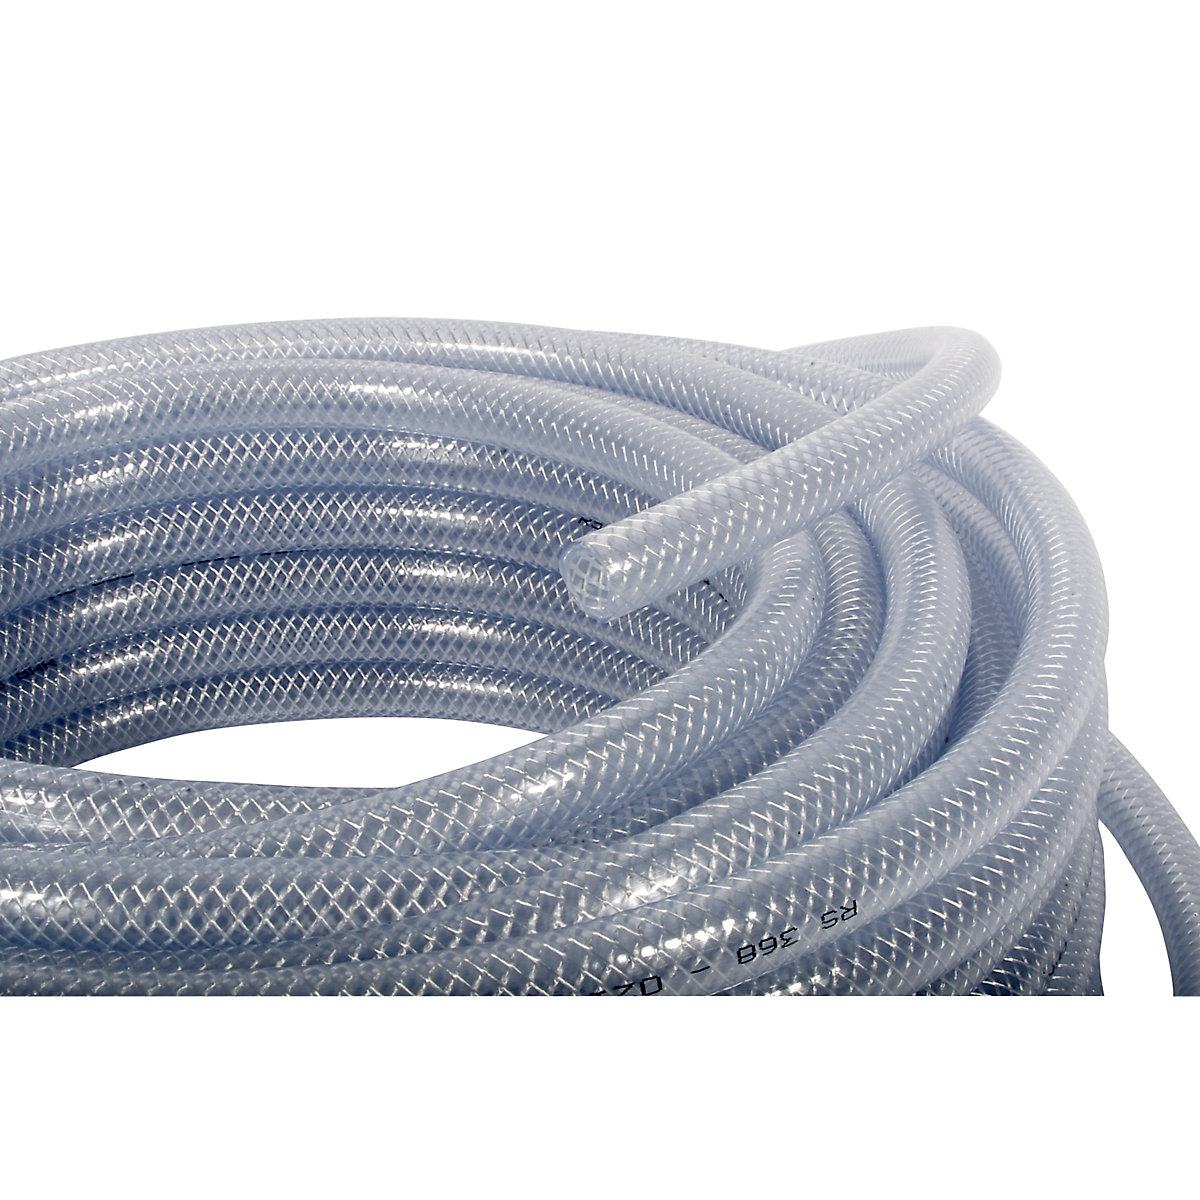 Water hose made of PVC, clear – COBA